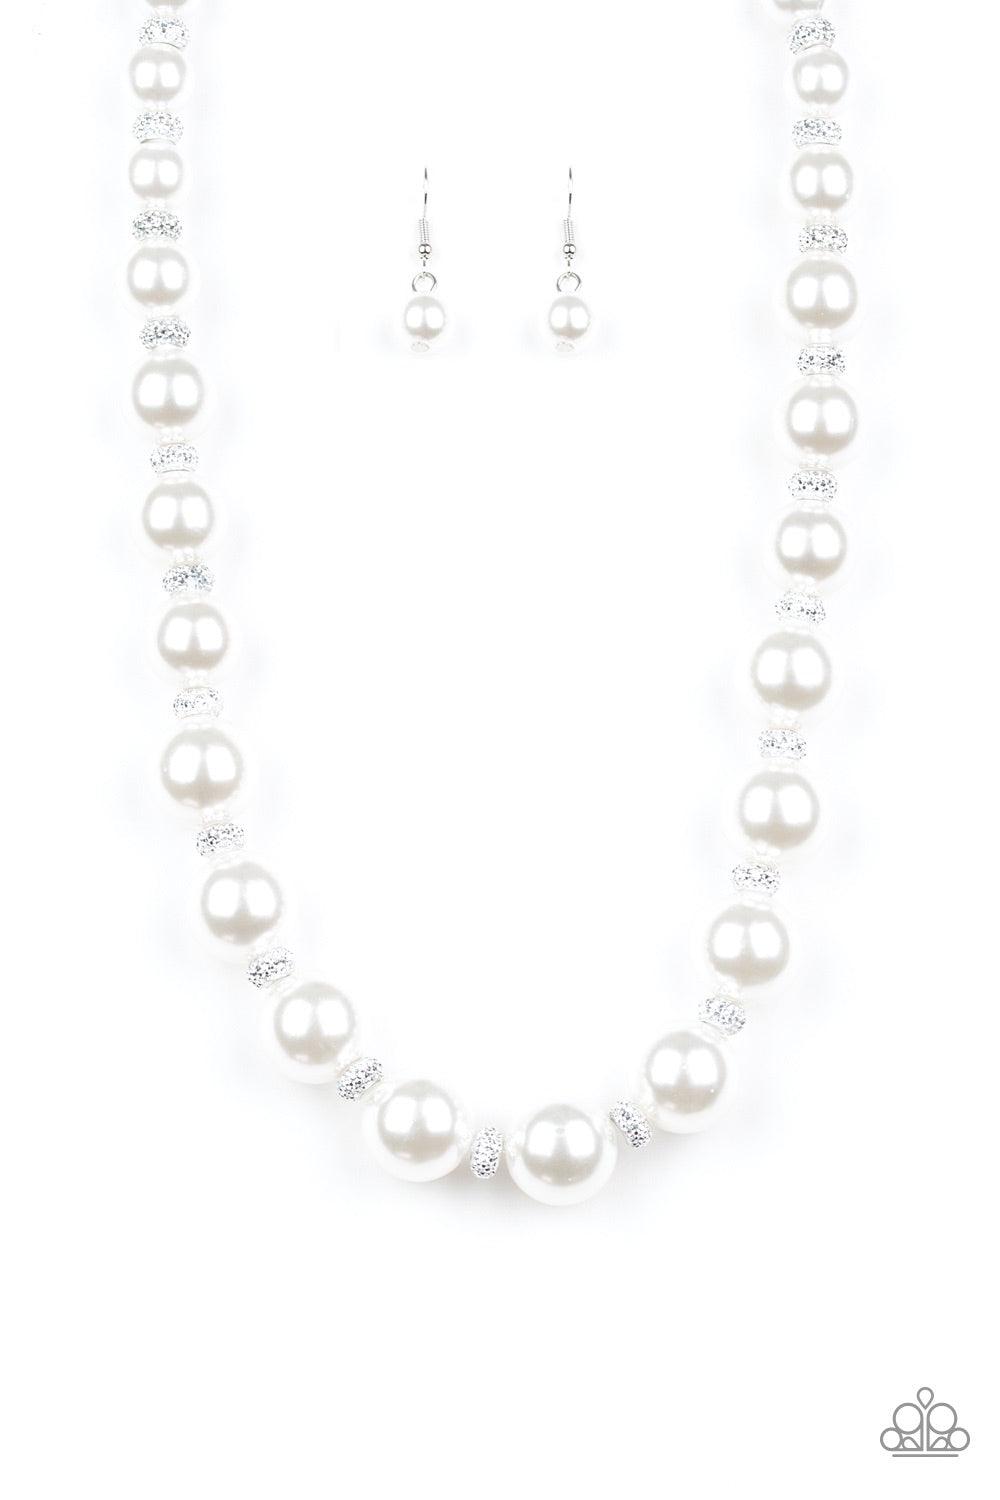 Paparazzi Accessories Uptown Heiress - White Infused with dainty silvery rhinestone encrusted beads, a refined collection of oversized white pearls are threaded along an invisible wire below the collar for a timeless dazzle. Features an adjustable clasp c